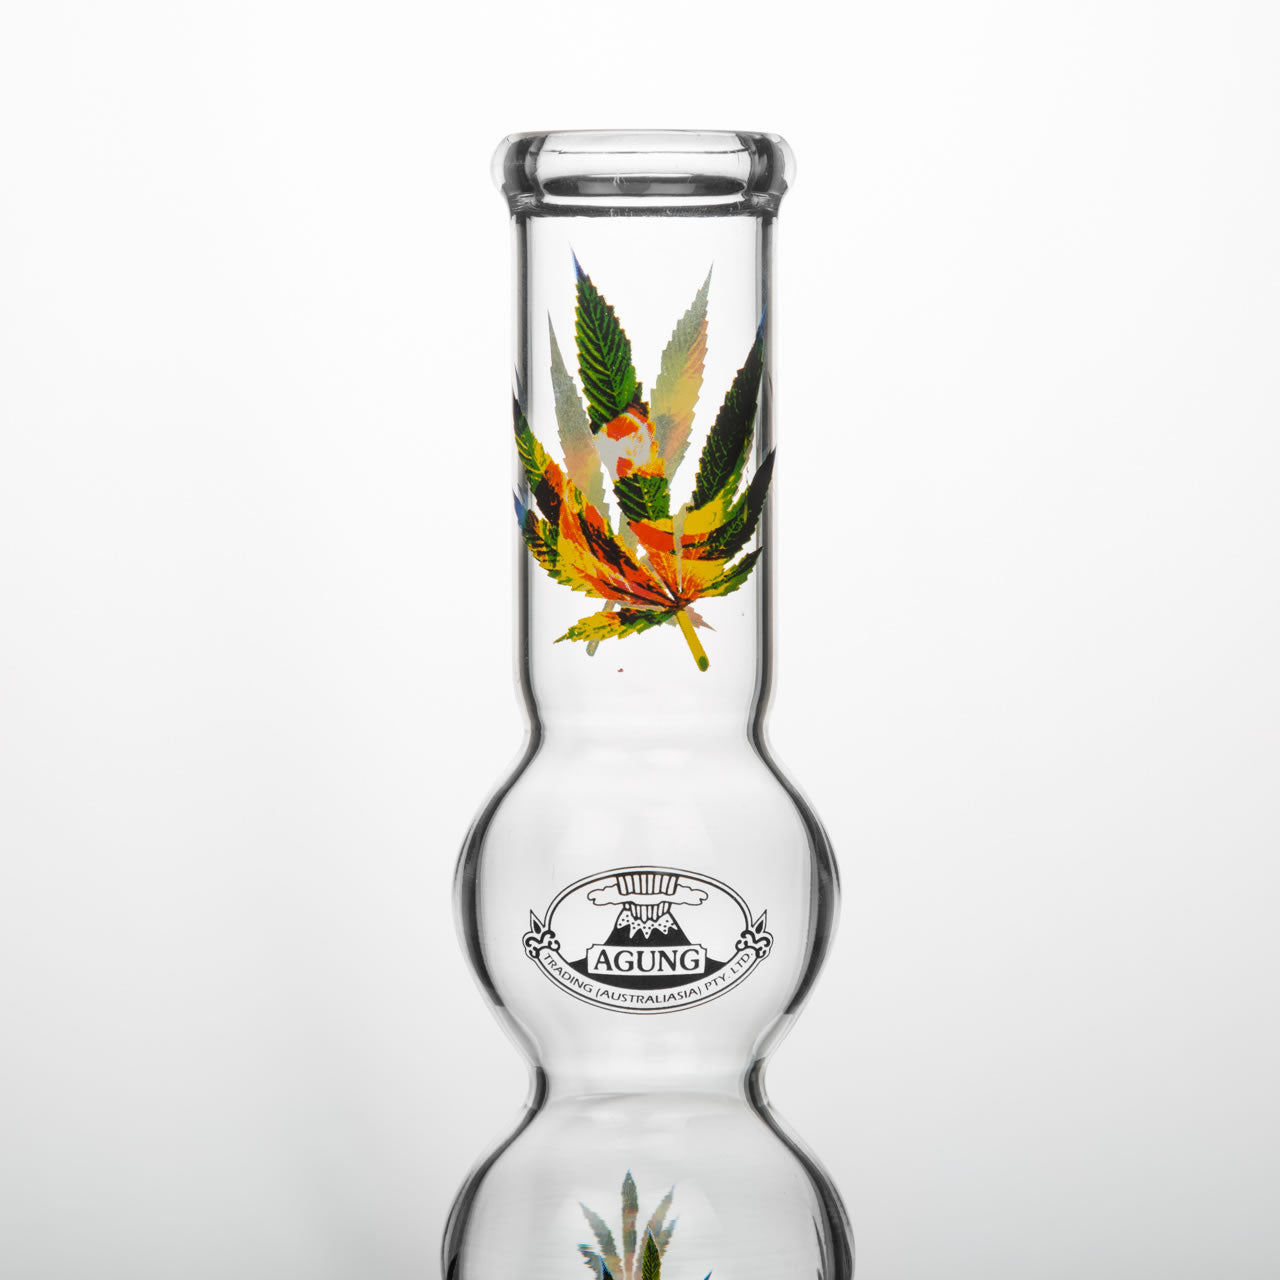  Glass bong designed for Aussie stoners with metal stem and brass cone piece.